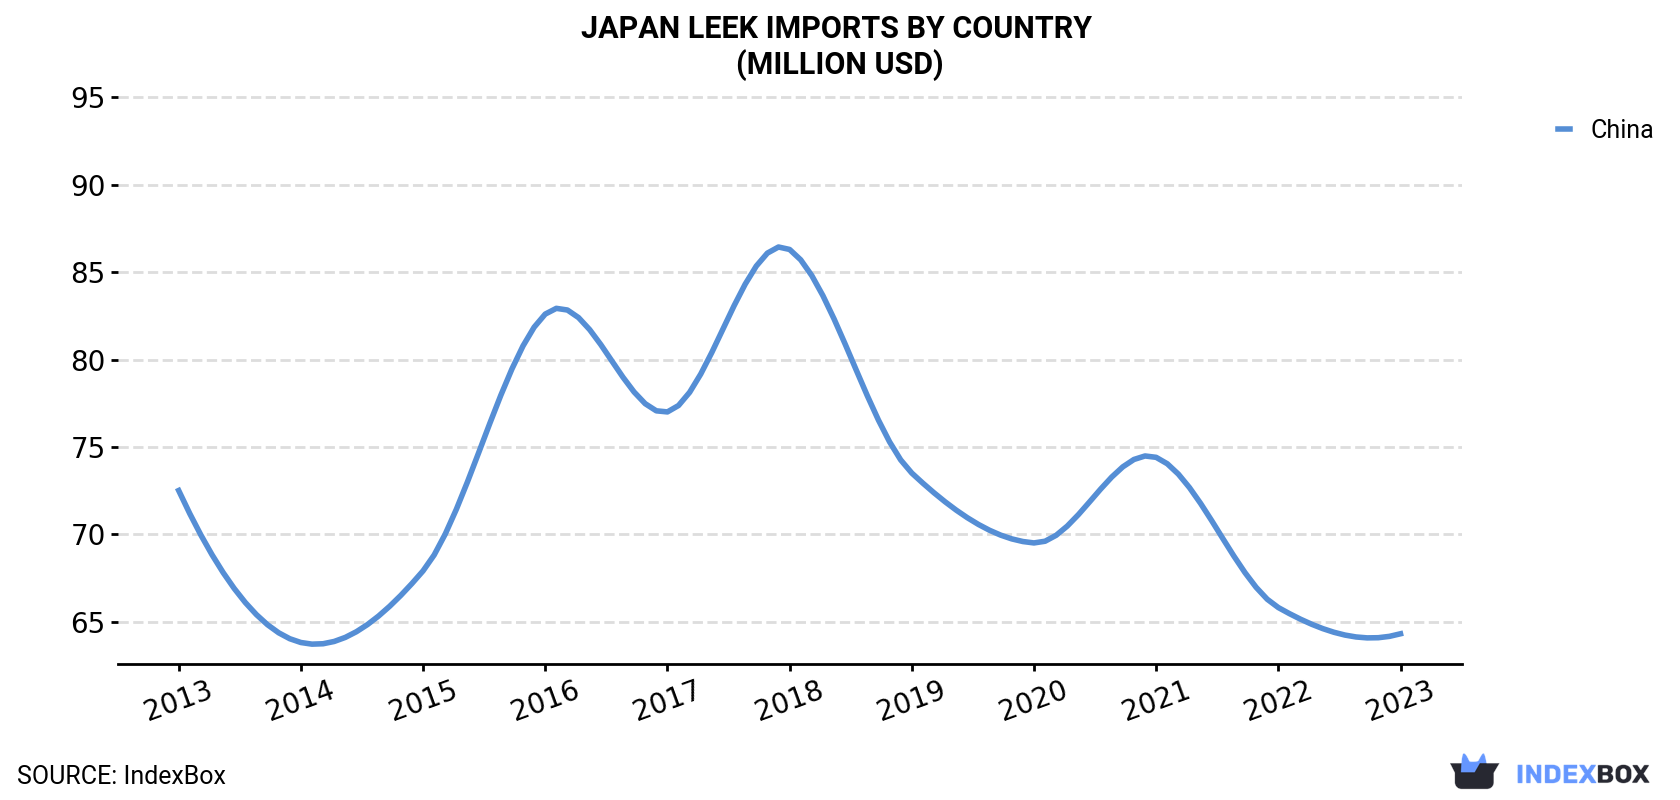 Japan Leek Imports By Country (Million USD)